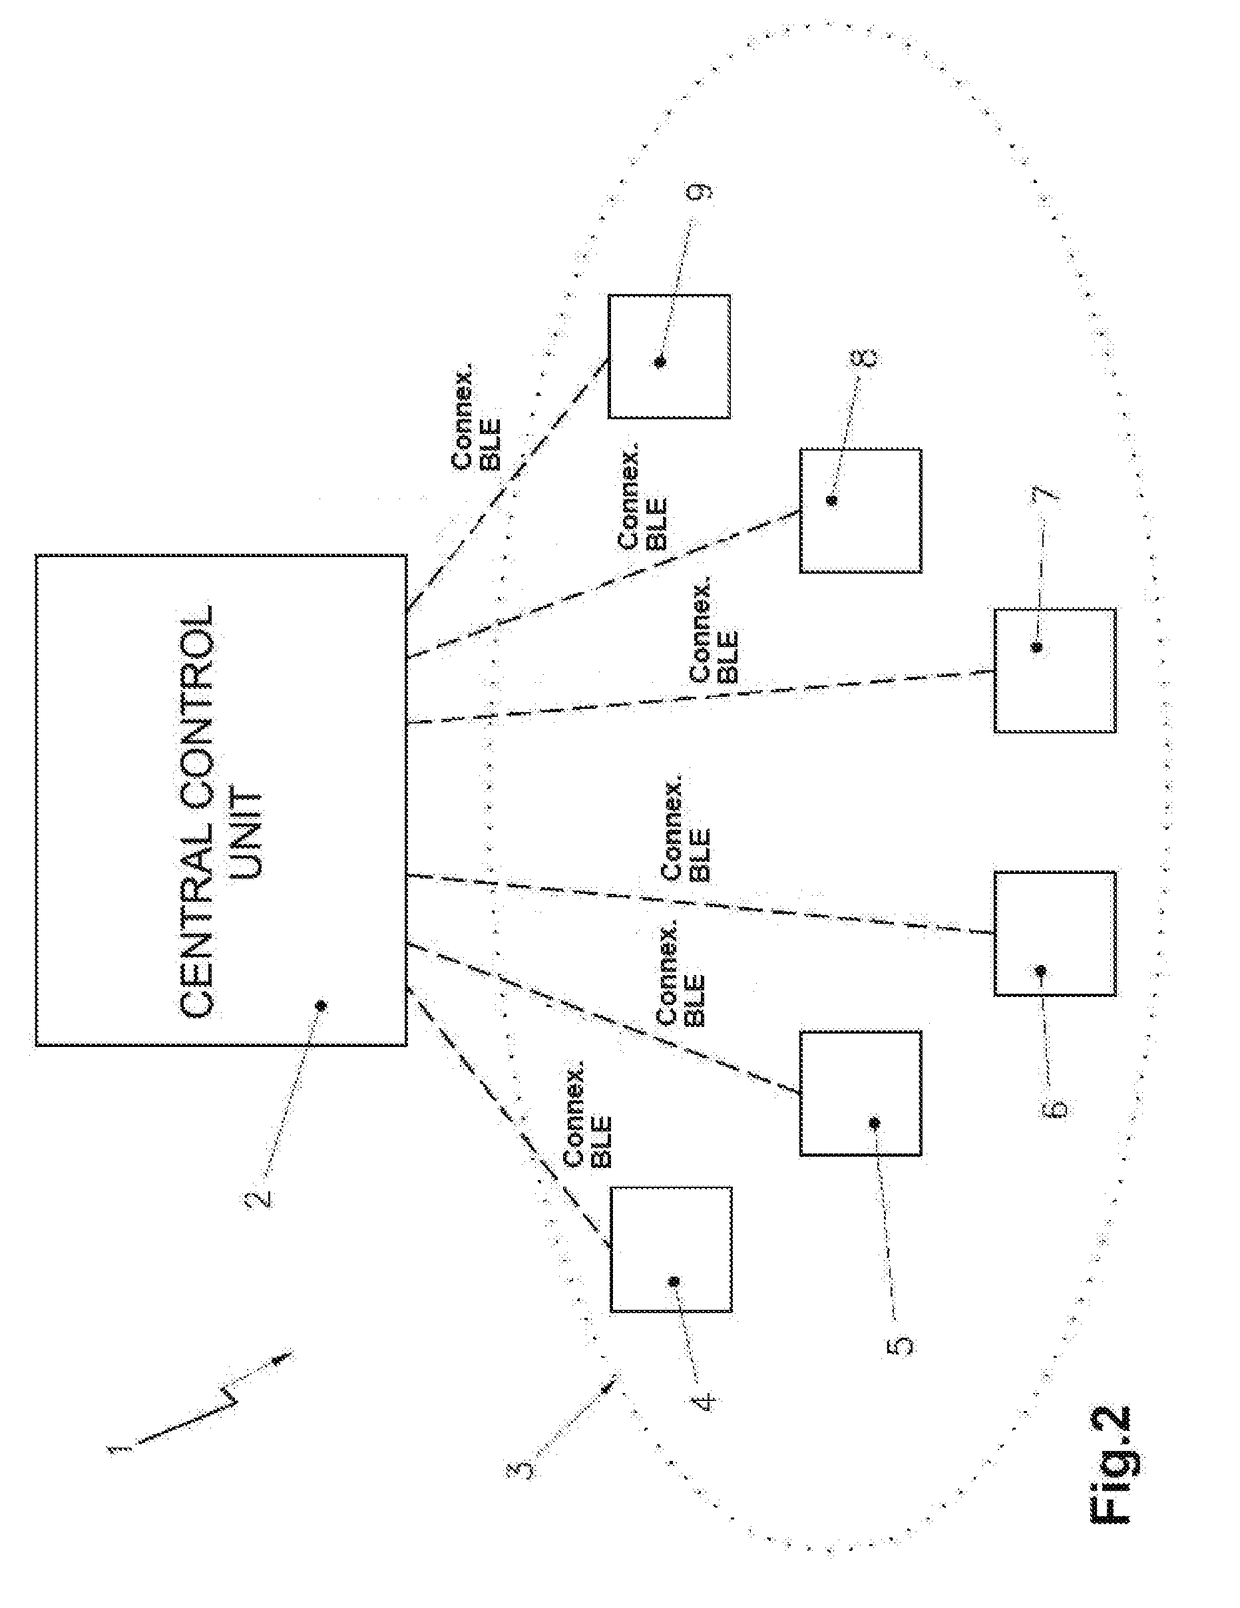 System providing multiple services using sensors with central control unit for vessels